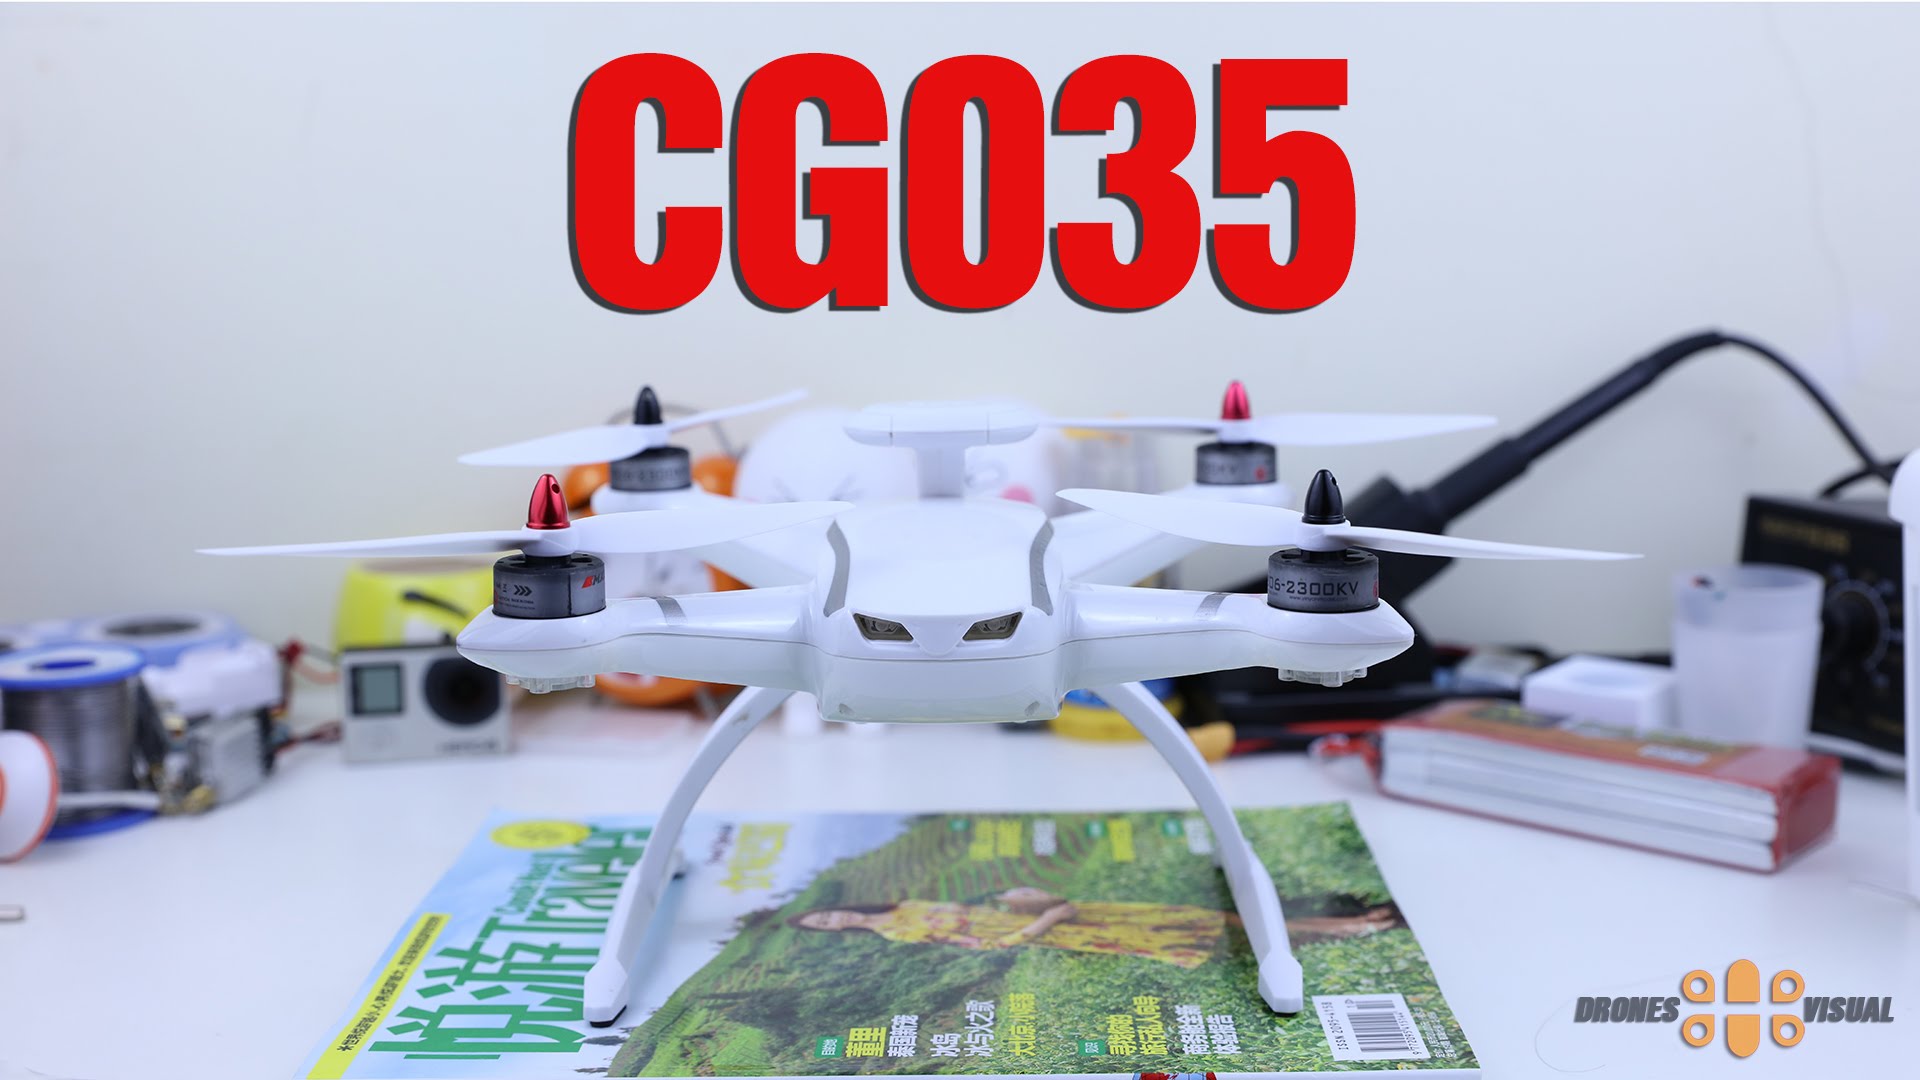 CG035 Drone with GPS and Follow Me Mode Unboxing